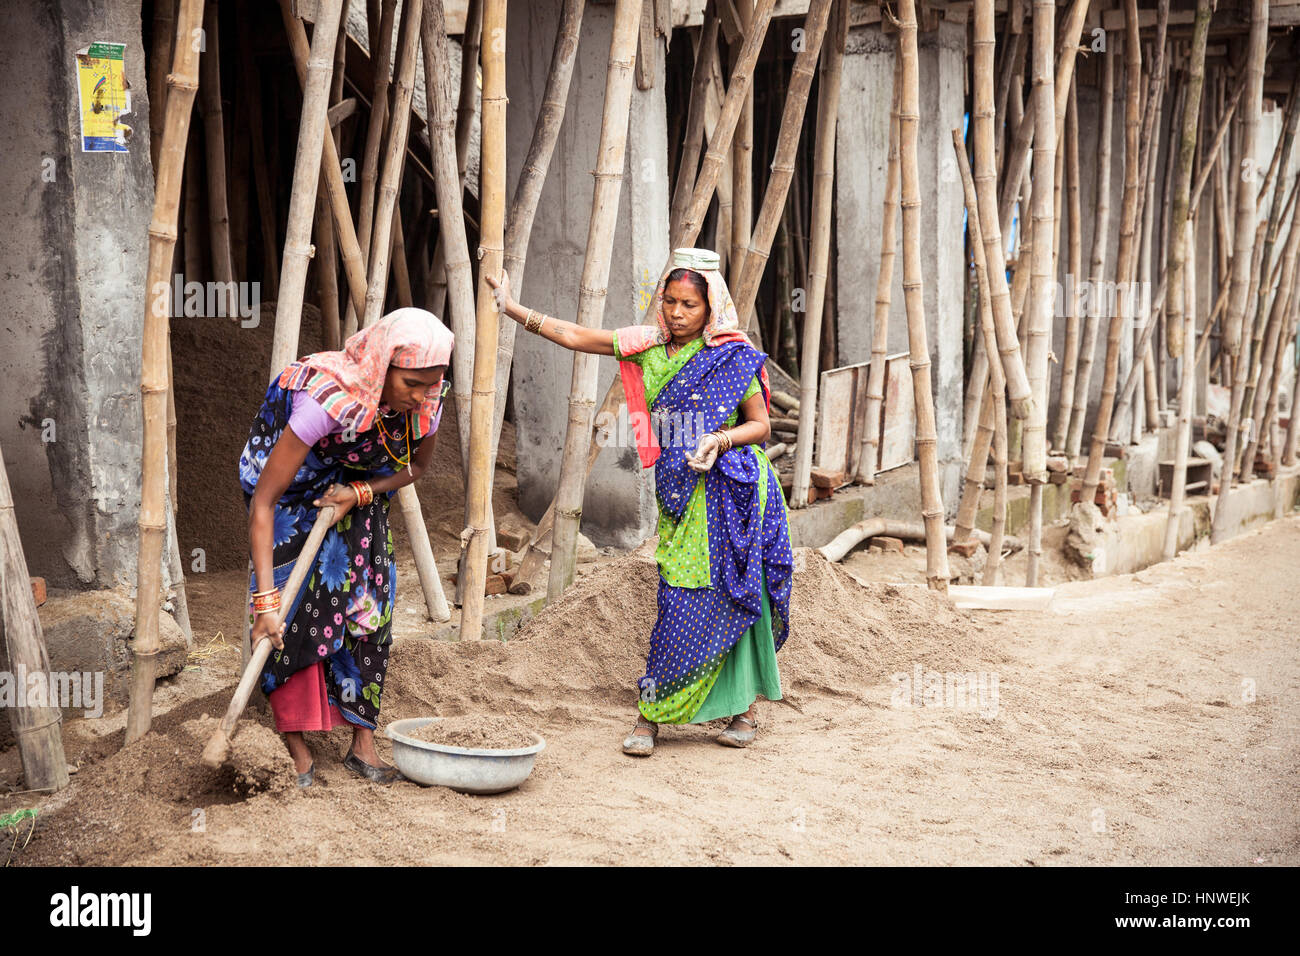 Dharamsala, India - 28 September, 2014: Indian women working at the construction Dharamsala, India. Stock Photo